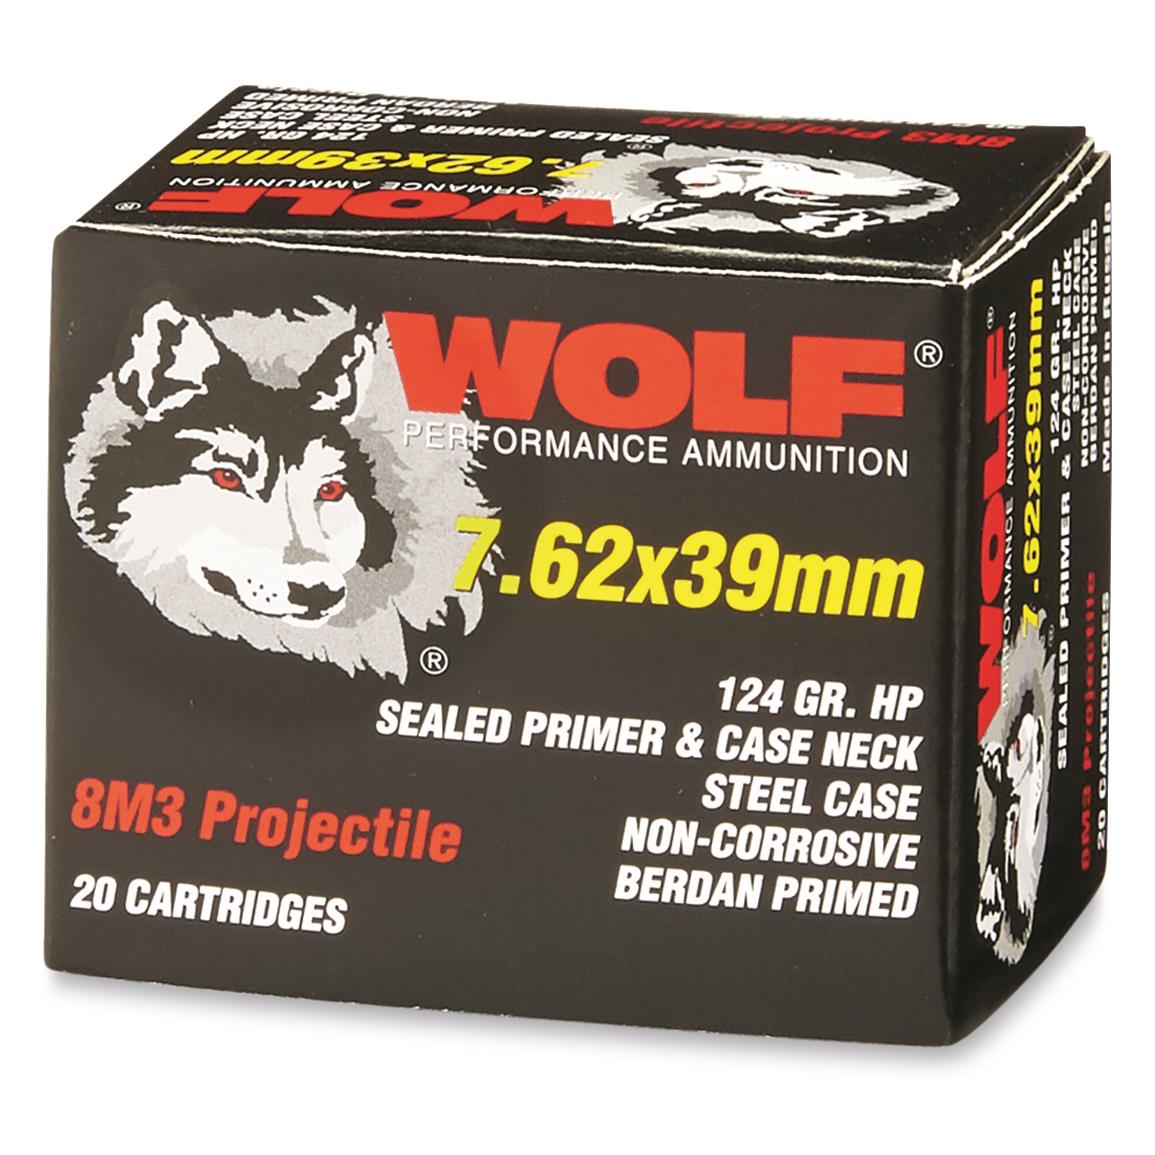 Wolf, 7.62x39mm, 8M3 Hollow Point, 124 Grain, 20 Rounds